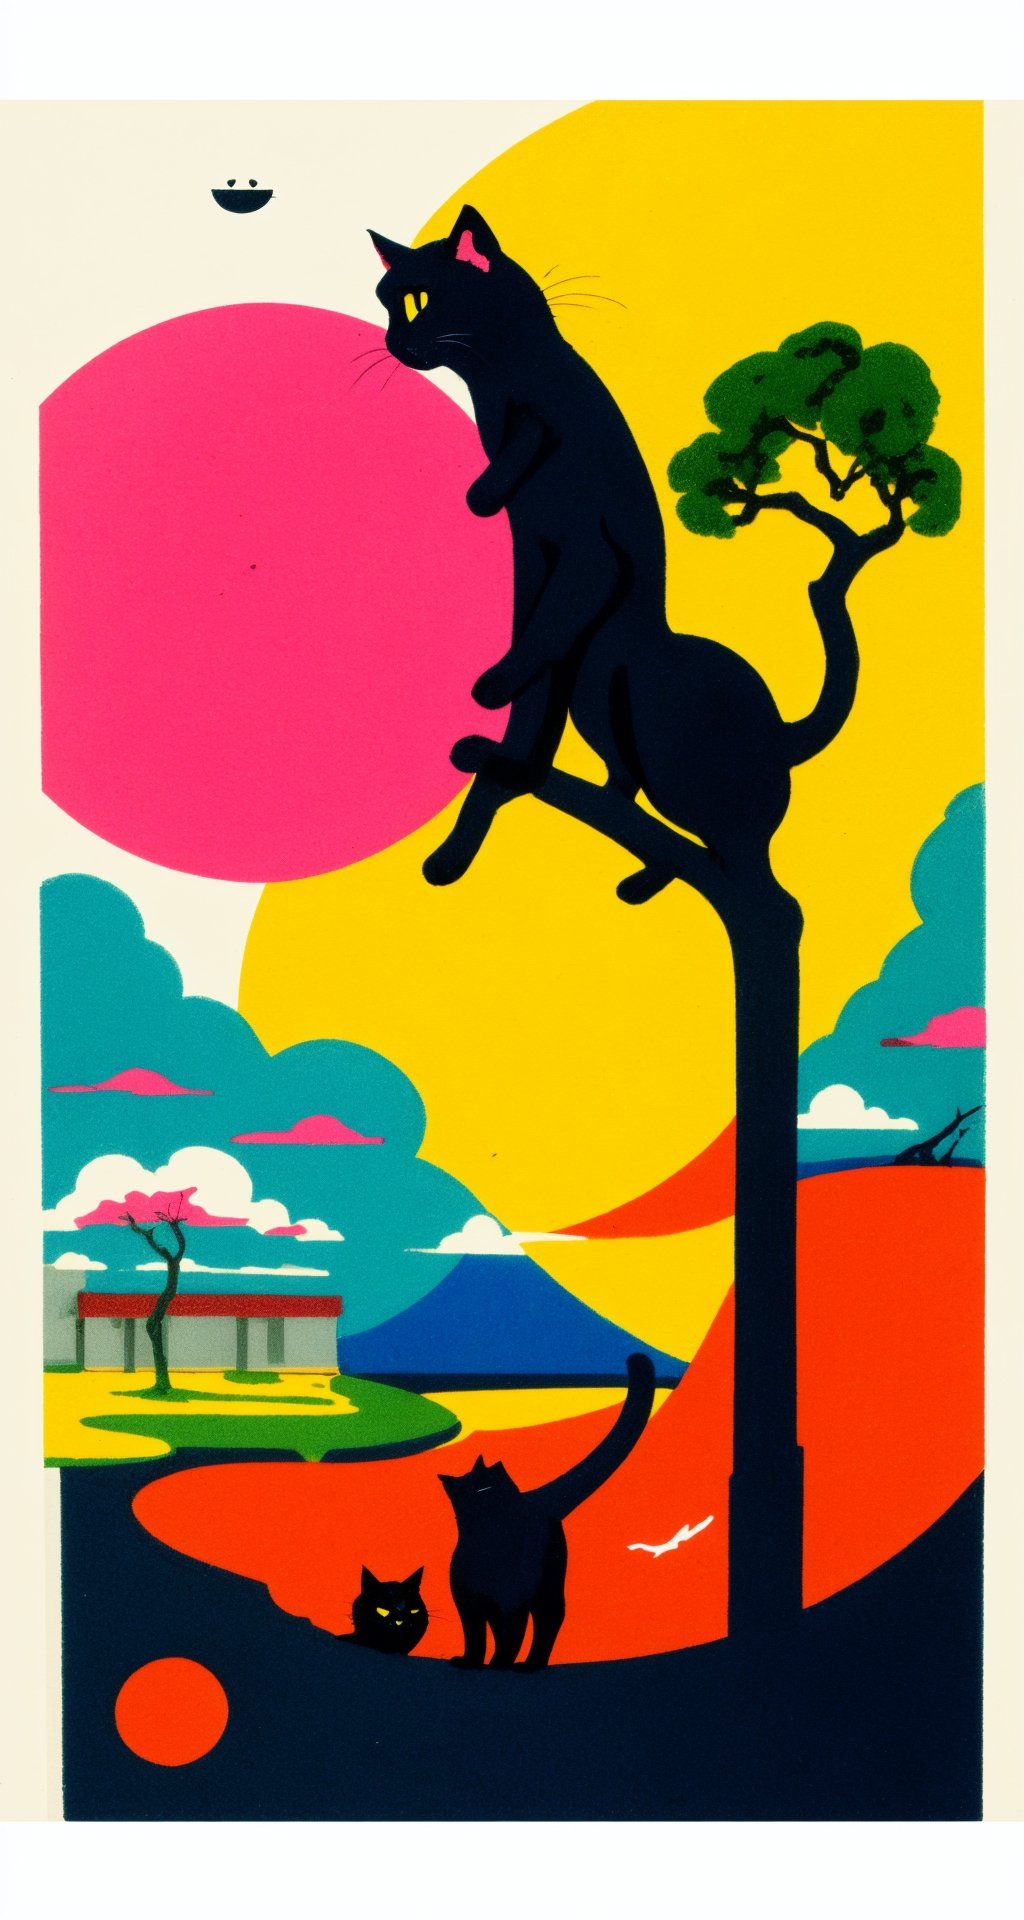 A postcard sized minimalist surreal illustration of a black cat, on a yellow background,with green bonsai tree clouds, and a pink circle of sun, above, vintage ink print, Japanese styled bar and cafe flyer, masterpiece of an illustration, lovely print style. reminiscent of the style of Rene Gruau and Saul Bass, illustration, GBH, landscape, outdoors,illustration,landscape